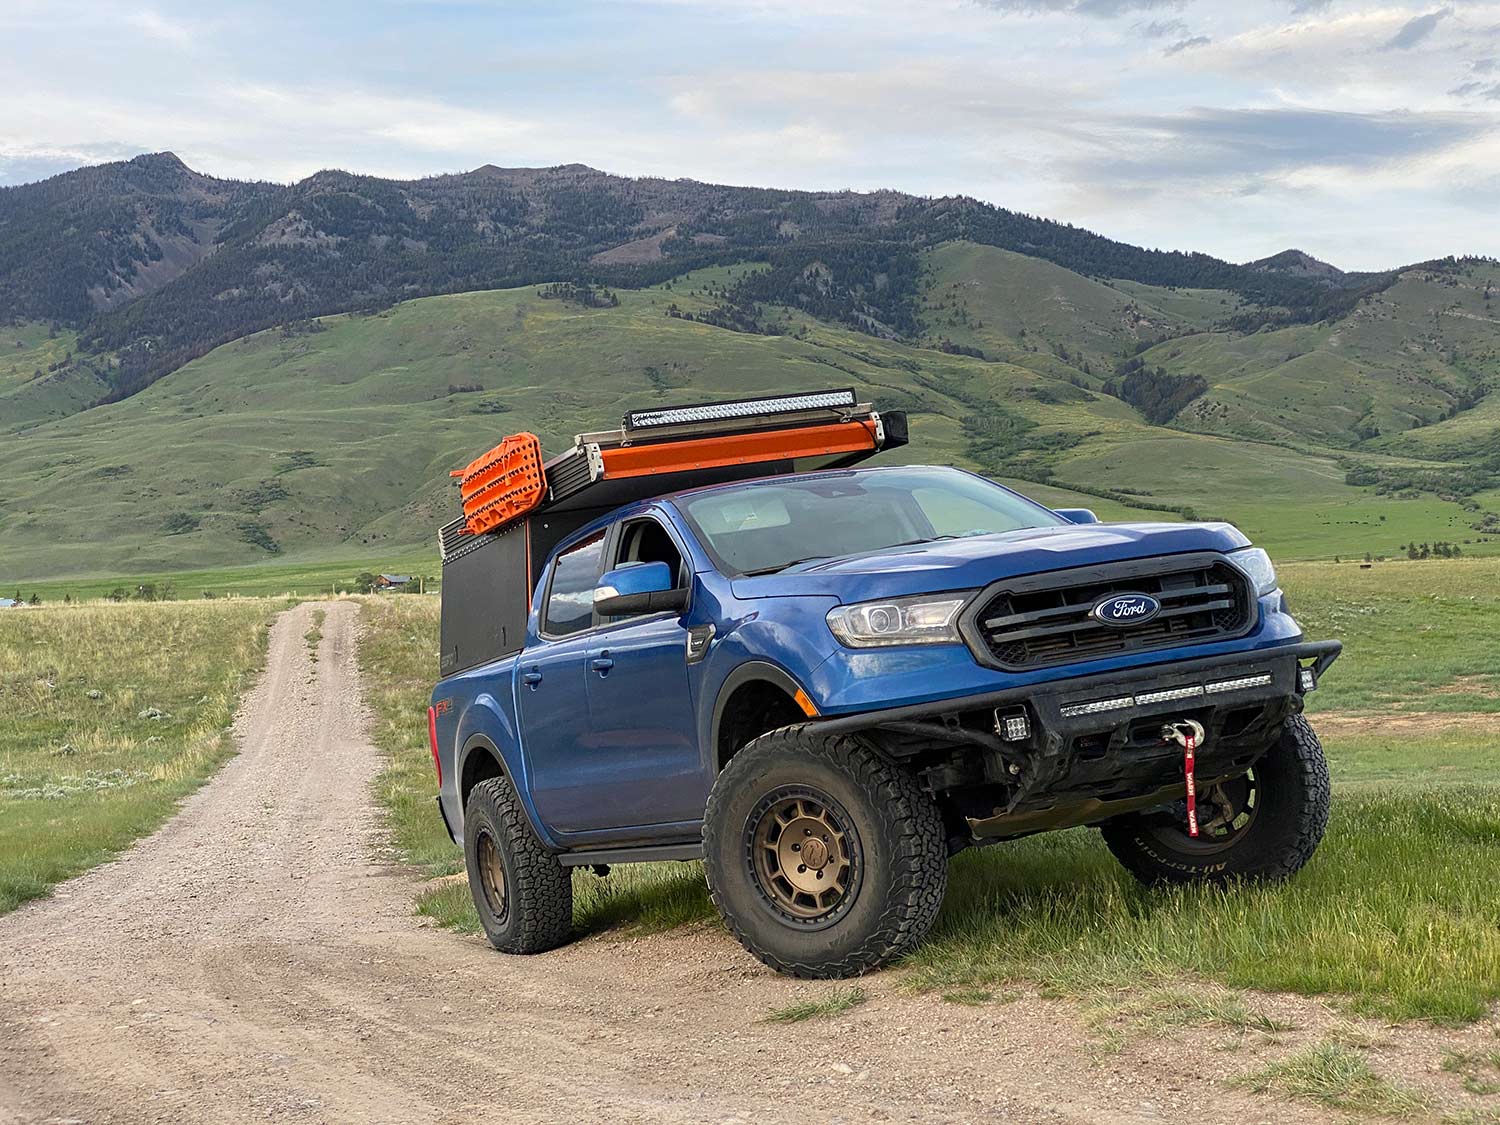 A blue ford pickup truck outfitted with custom attachments and gear.